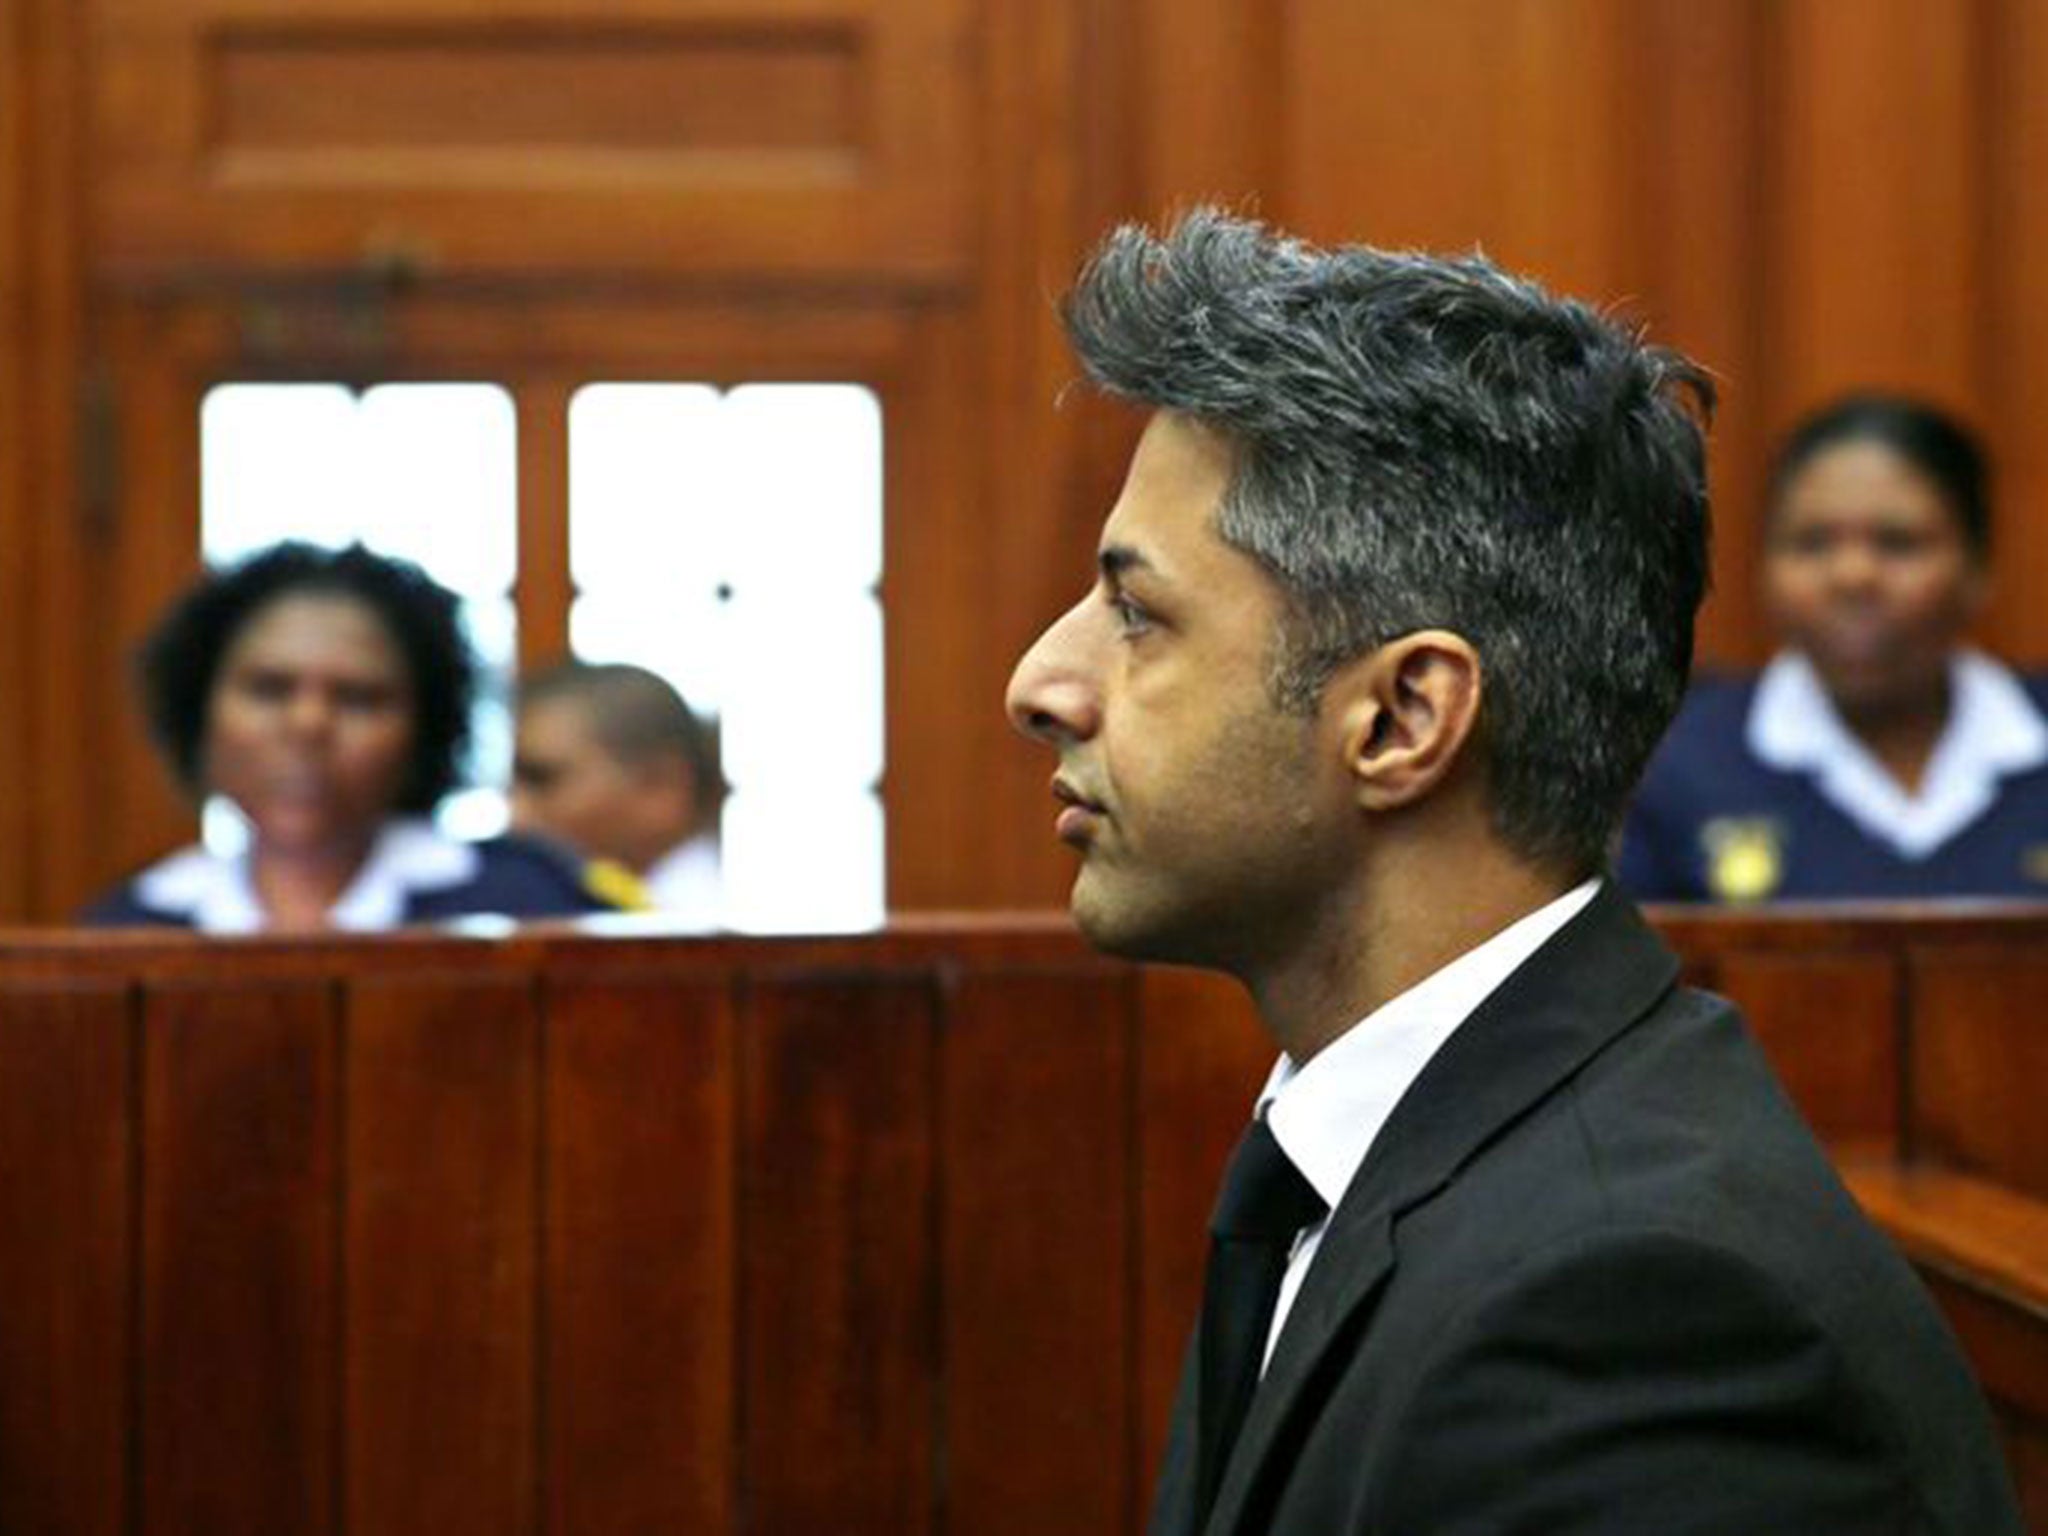 British businessman Shrien Dewani appeared in the high court in Cape Town on Monday. He faces charges of orchestrating the killing of his wife Anni, while on honeymoon in the country four years ago